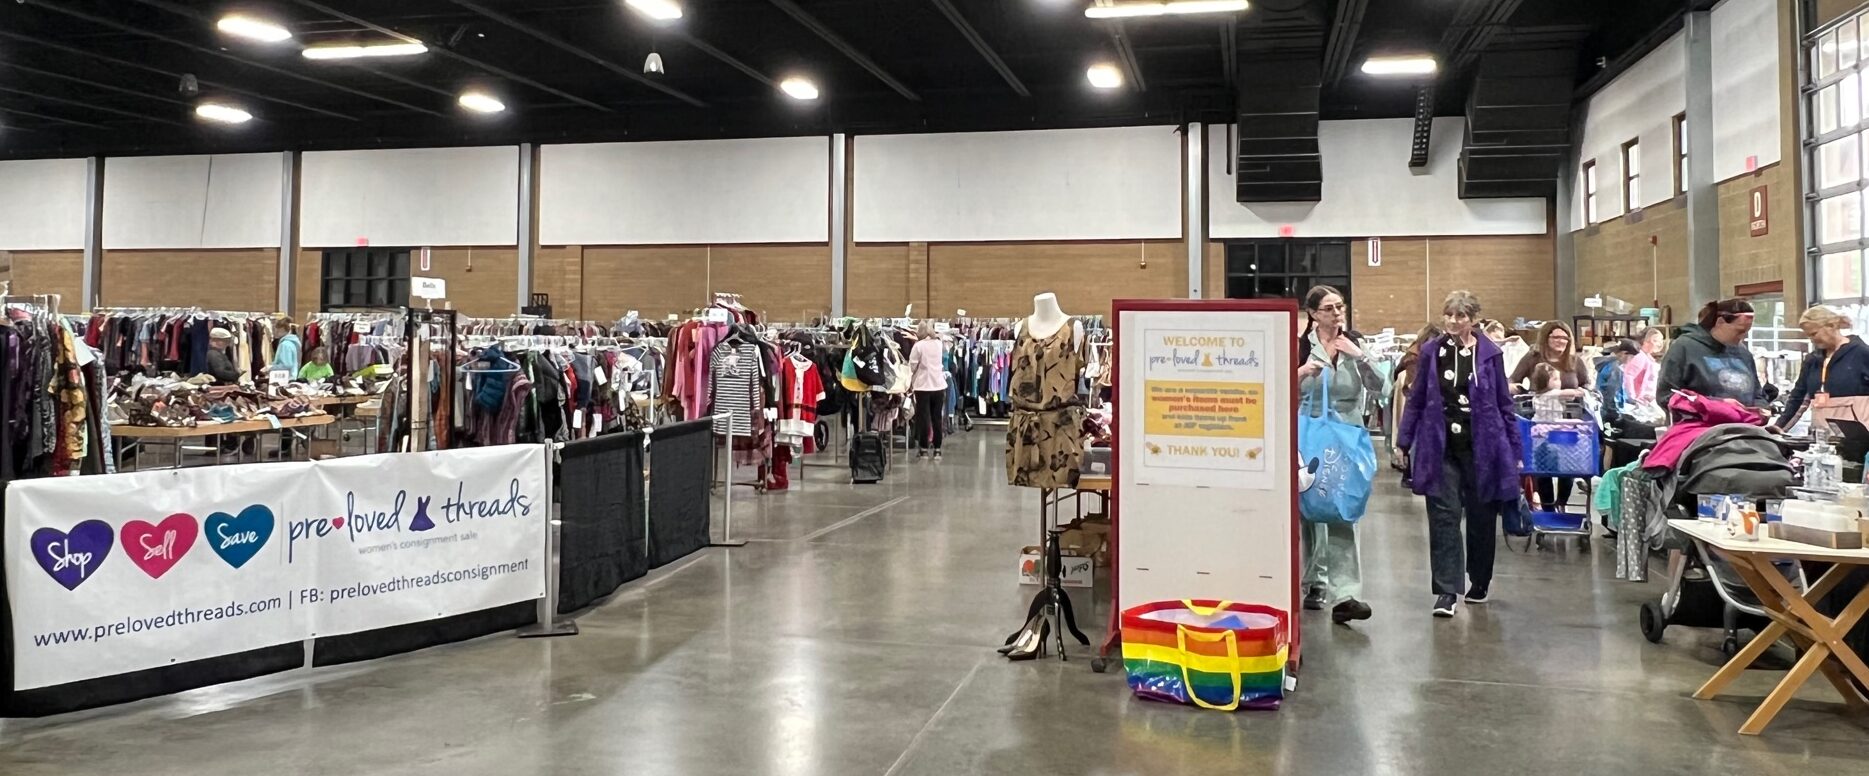 SPRING SALE - MARCH 21-24 AT THE WASHINGTON STATE FAIRGROUNDS